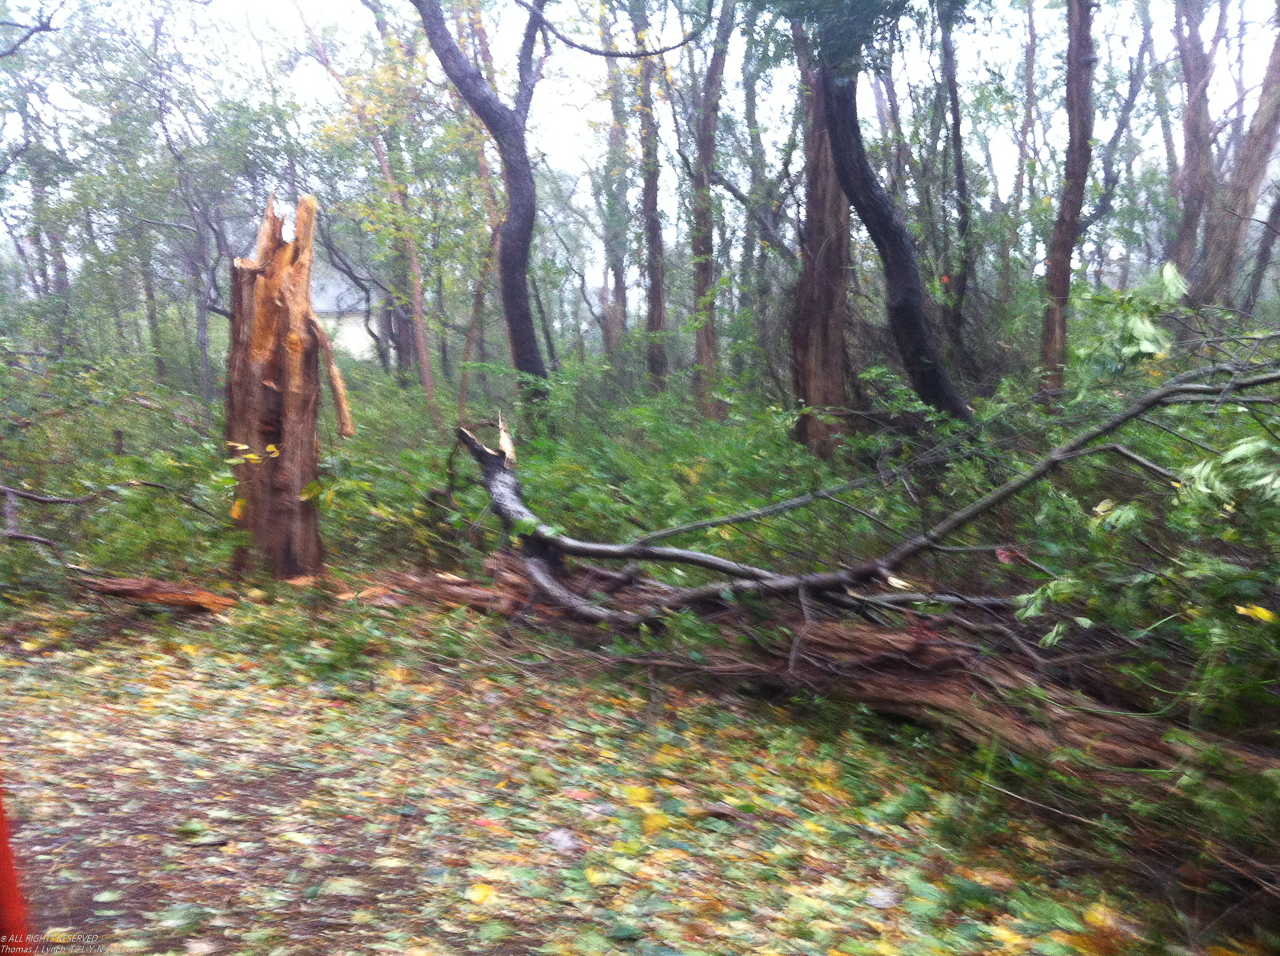 Hurricane Sandy come to town Nov 2012  ~~  Tree #2: next to my barn but fell back to the town's easment mainly.